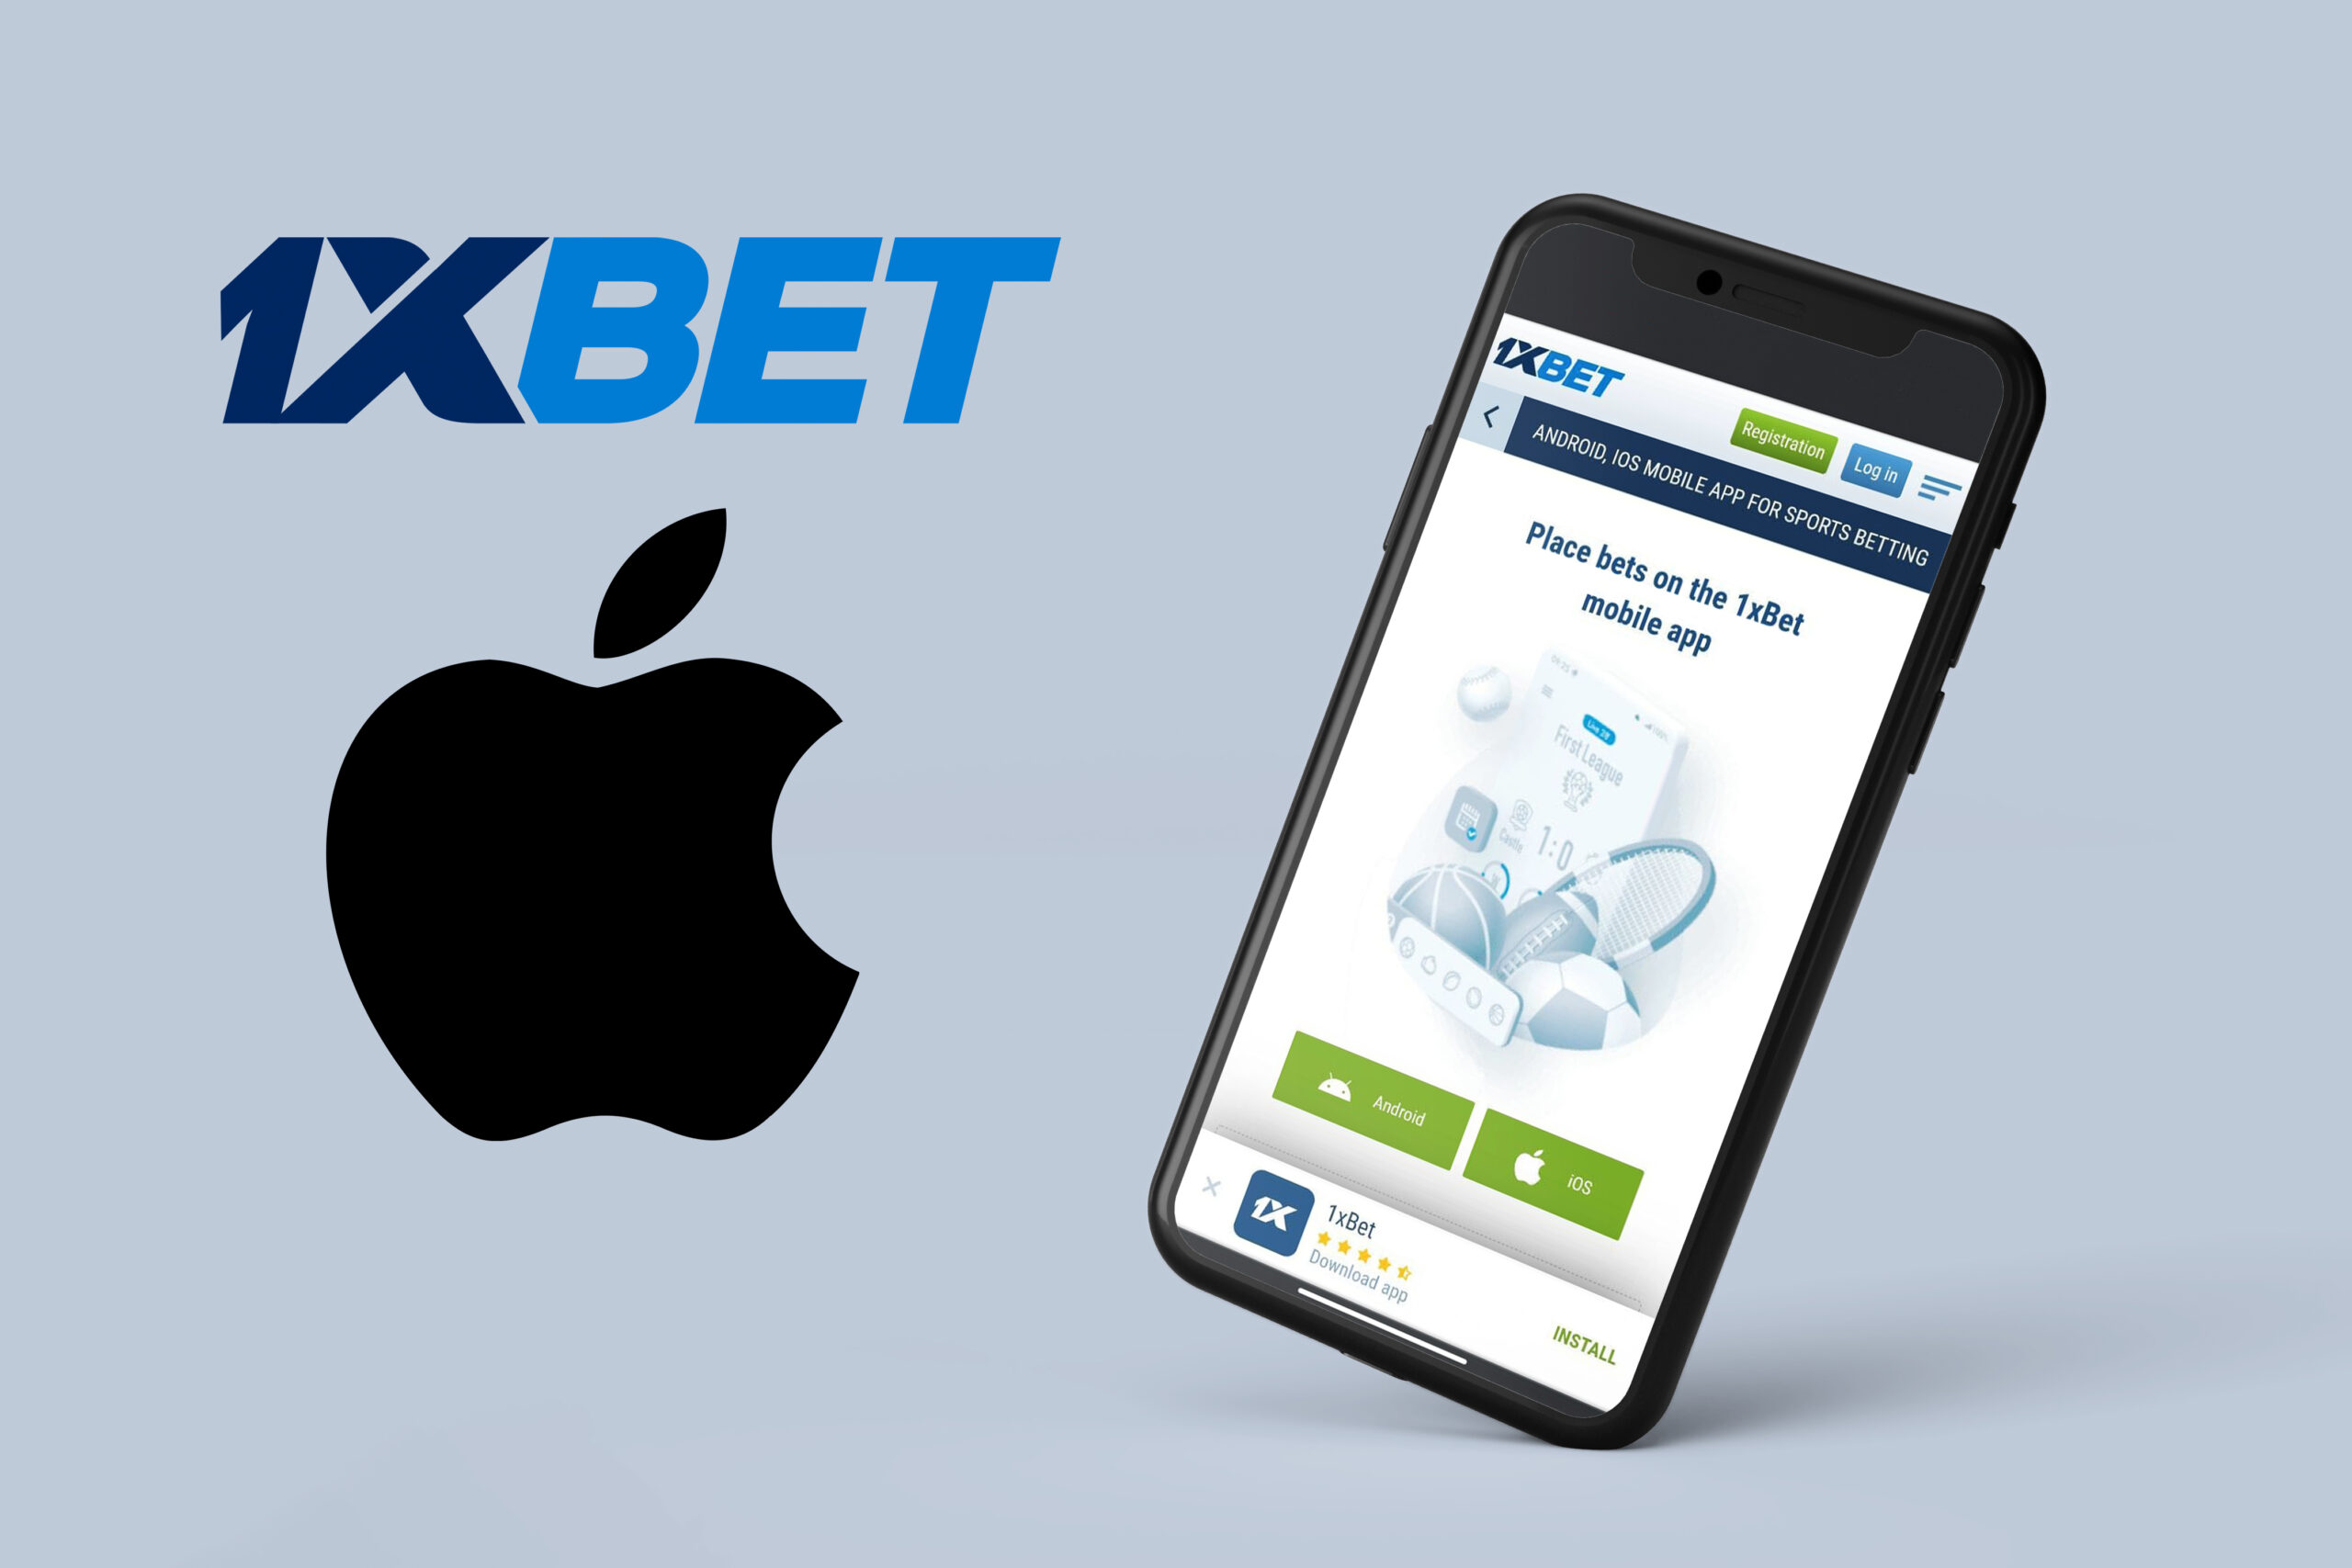 You can register in 1xbet via the app on your iOS device.